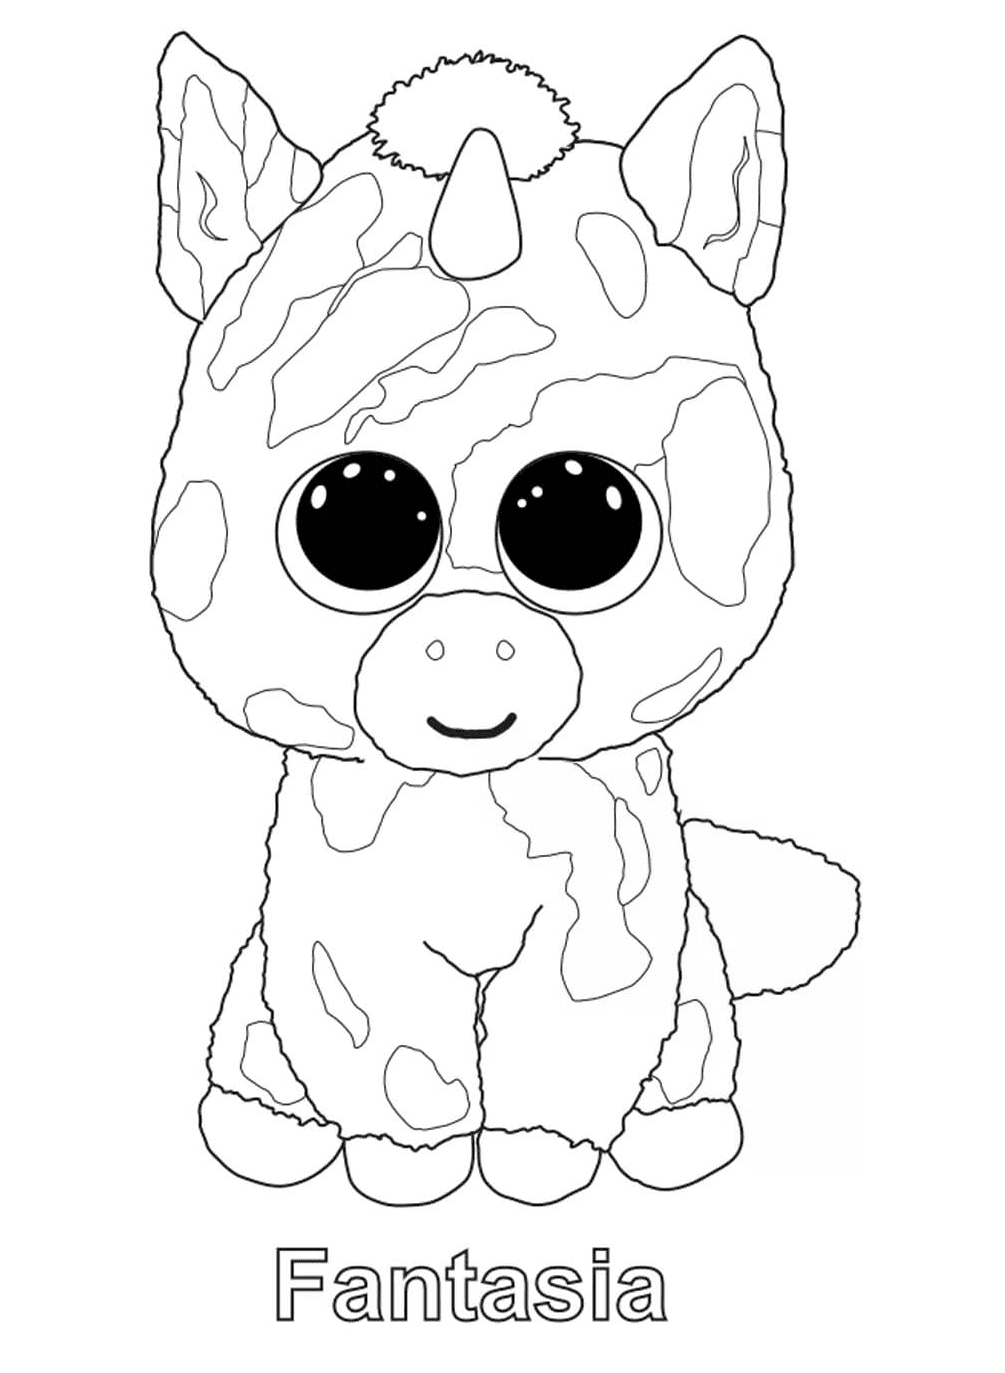 Fantasia Beanie Boos Coloring Page